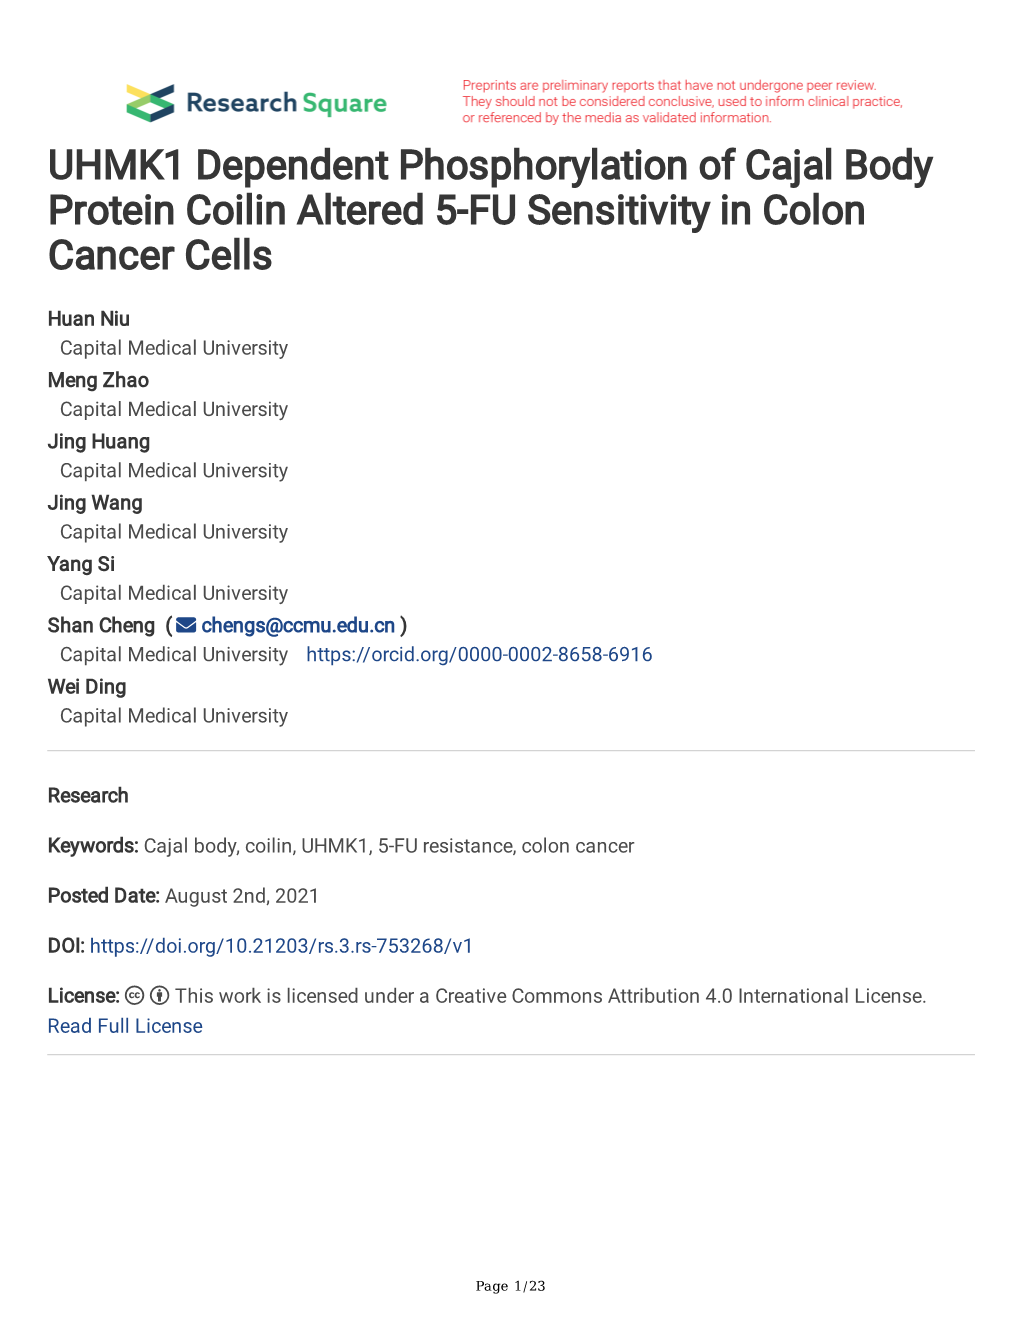 UHMK1 Dependent Phosphorylation of Cajal Body Protein Coilin Altered 5-FU Sensitivity in Colon Cancer Cells